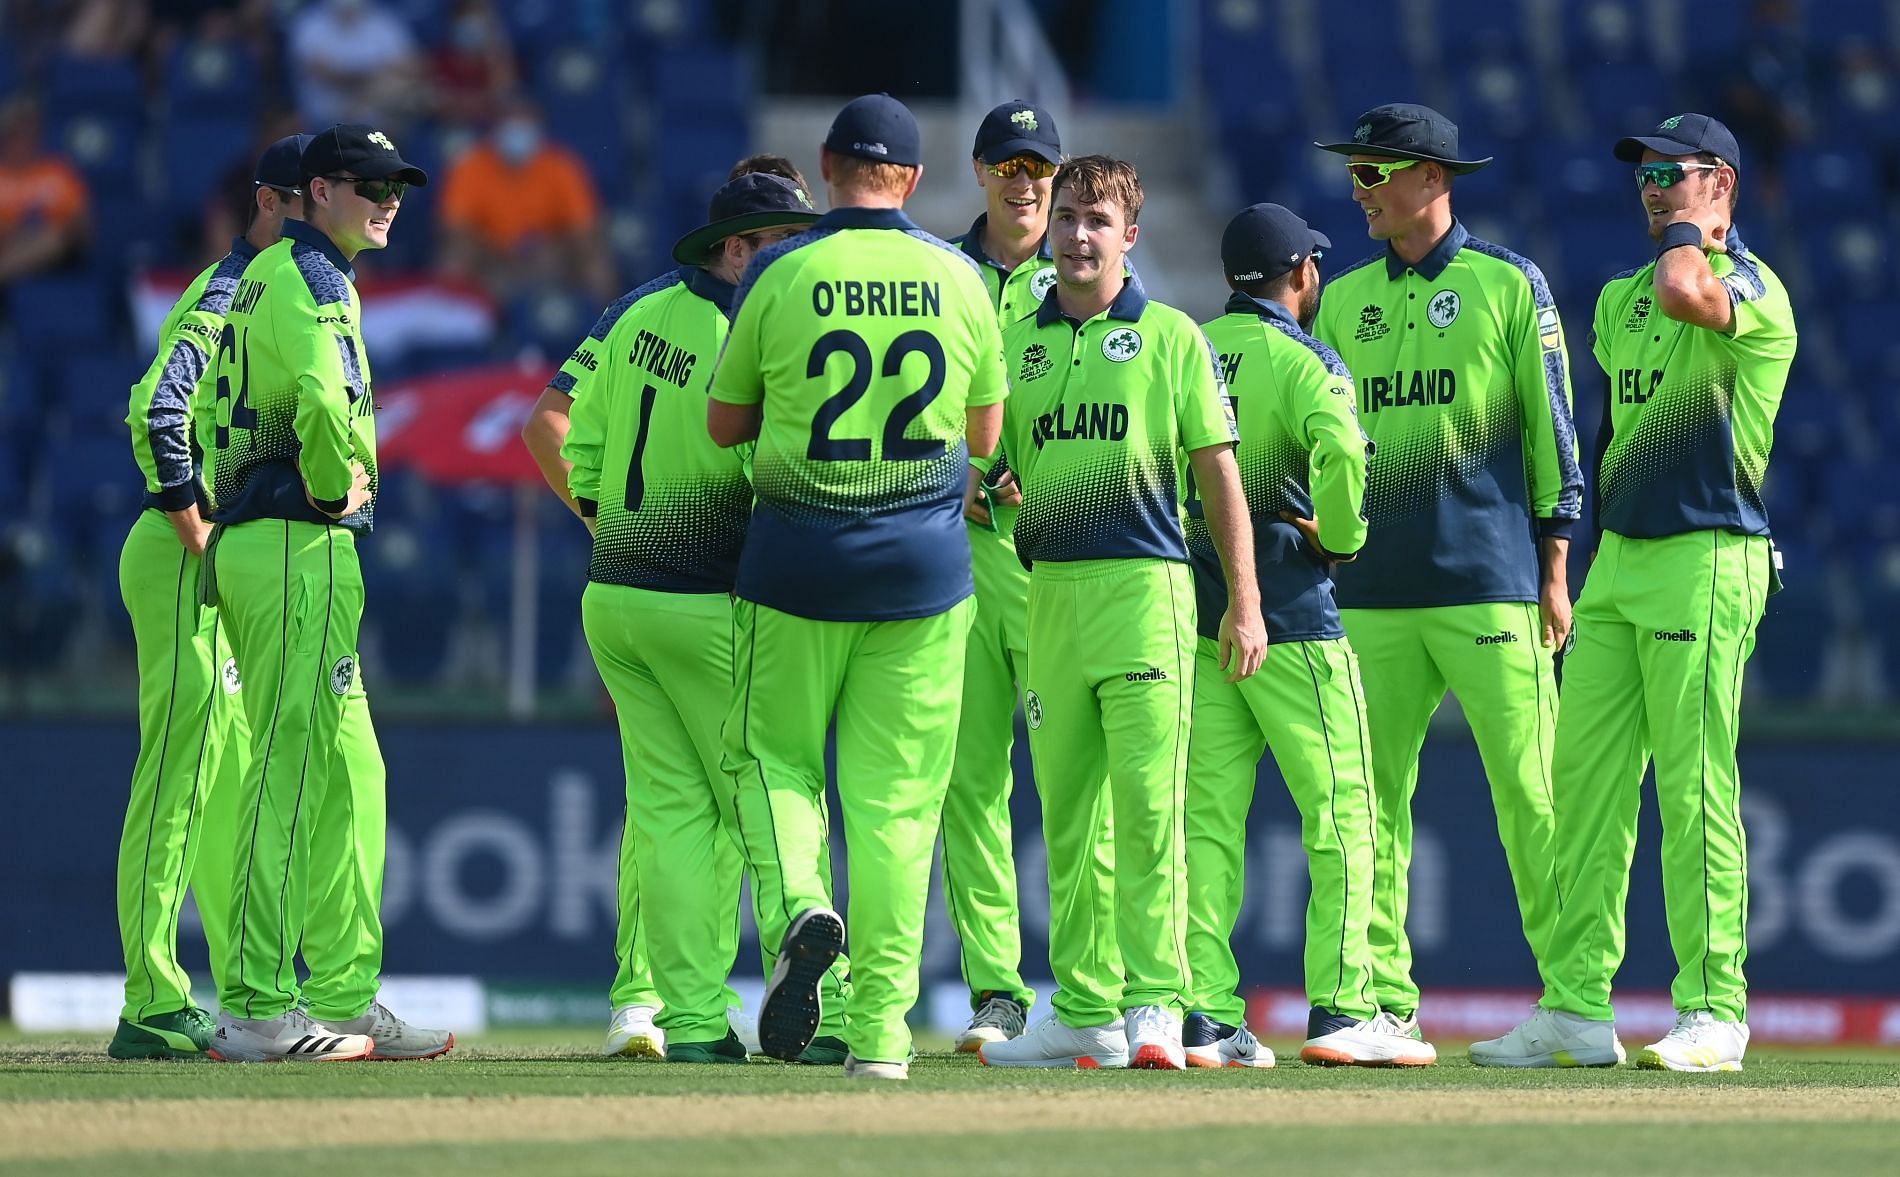 Ireland players during the match against Netherlands. Pic: T20WorldCup/ Twitter